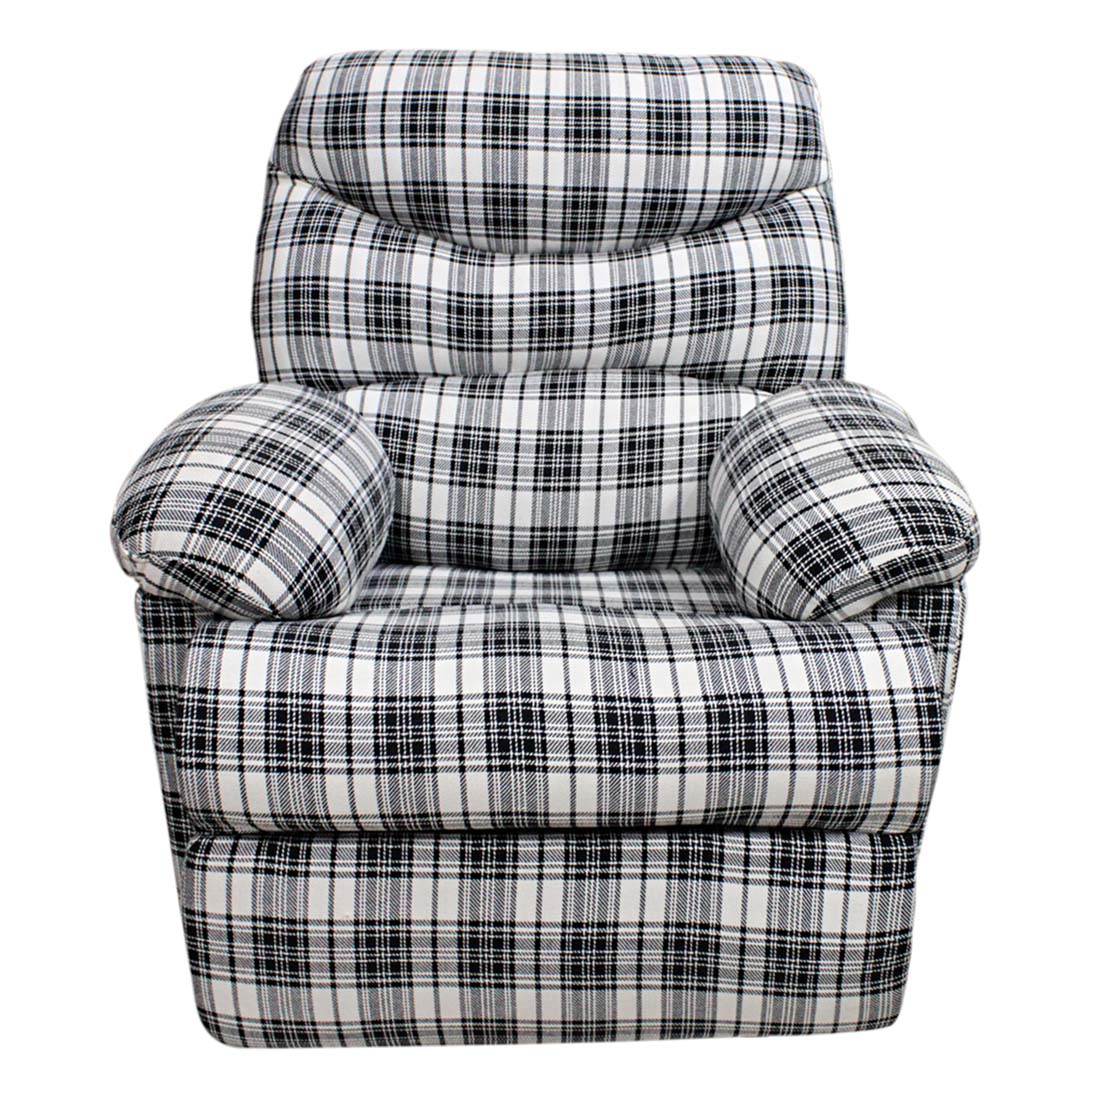 PRIMROSE Christie 1R Recliner With Cotton Fabric - Black And White